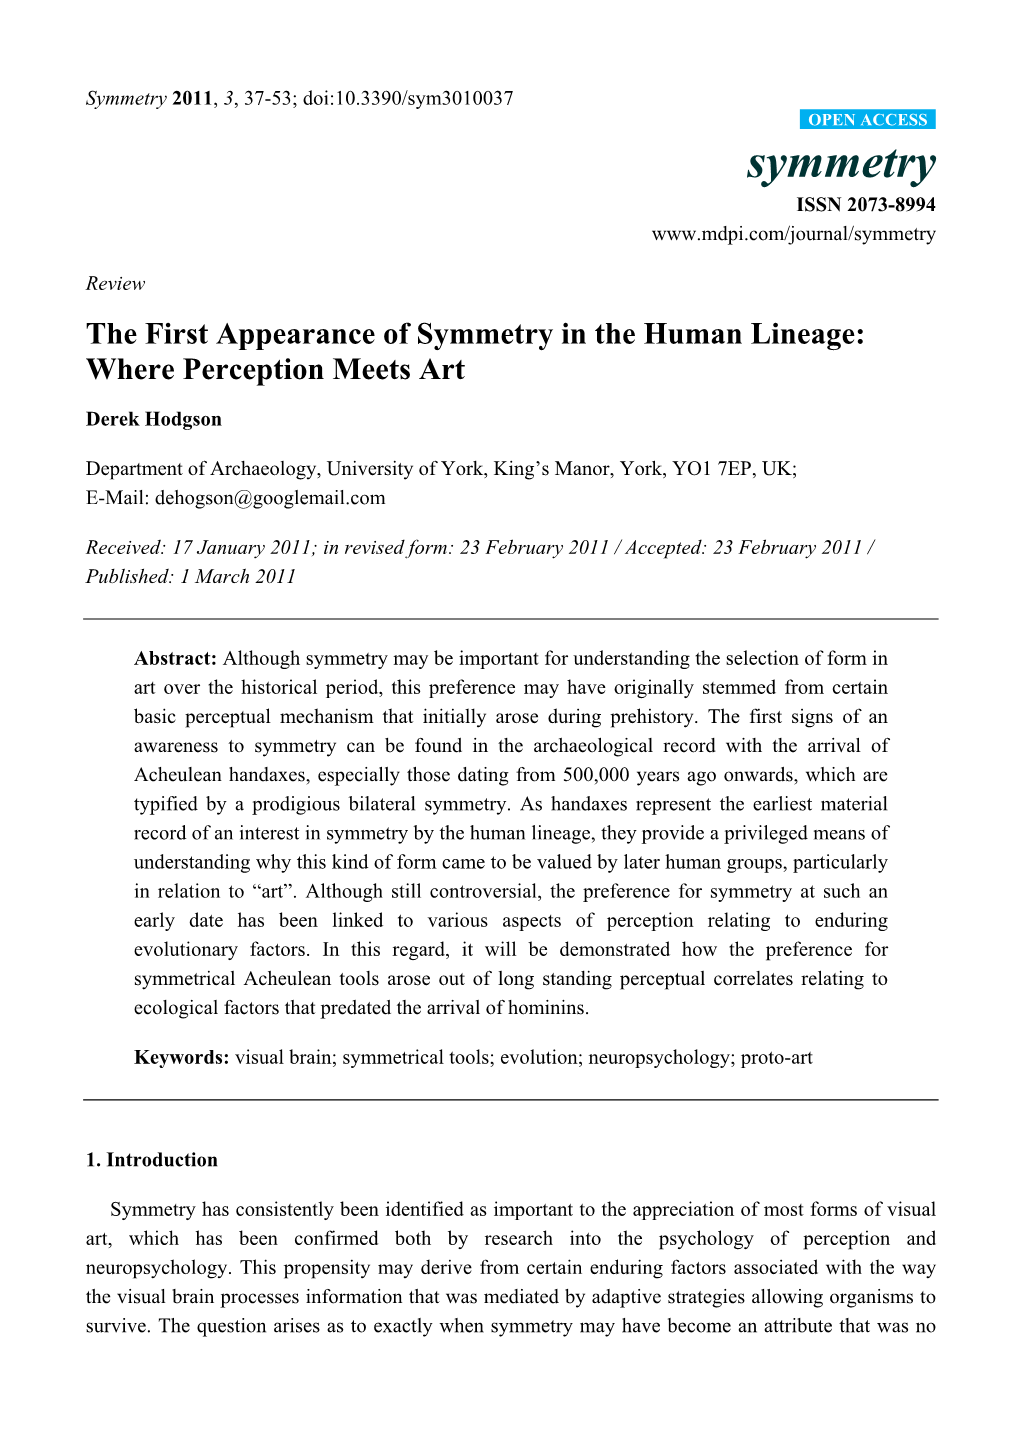 The First Appearance of Symmetry in the Human Lineage: Where Perception Meets Art